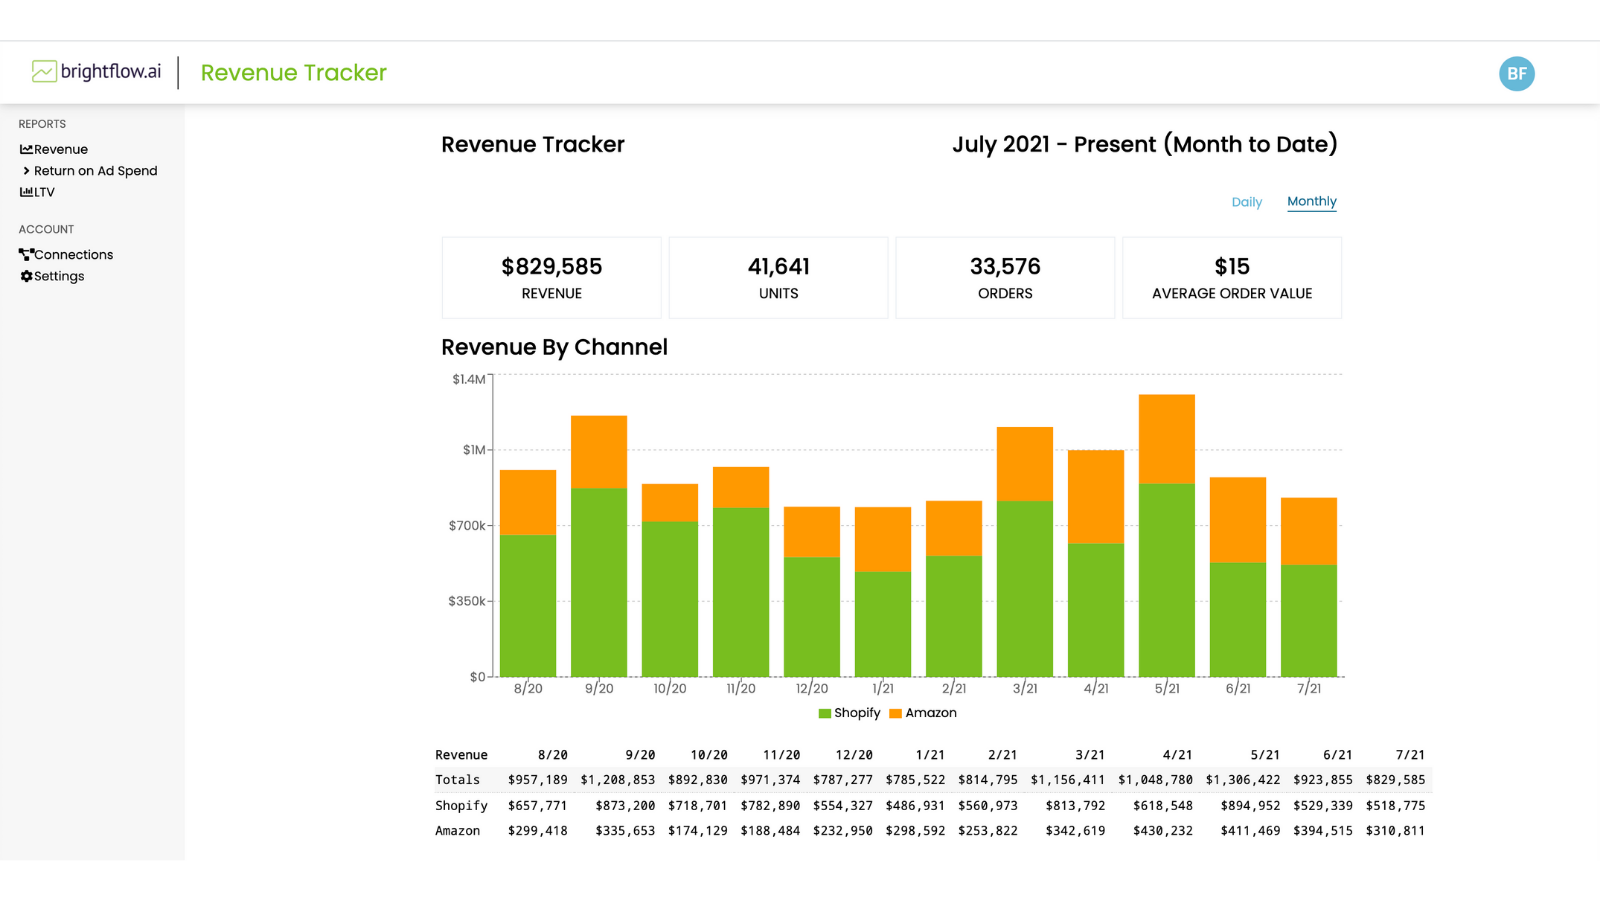 Track daily and monthly revenue across all channels